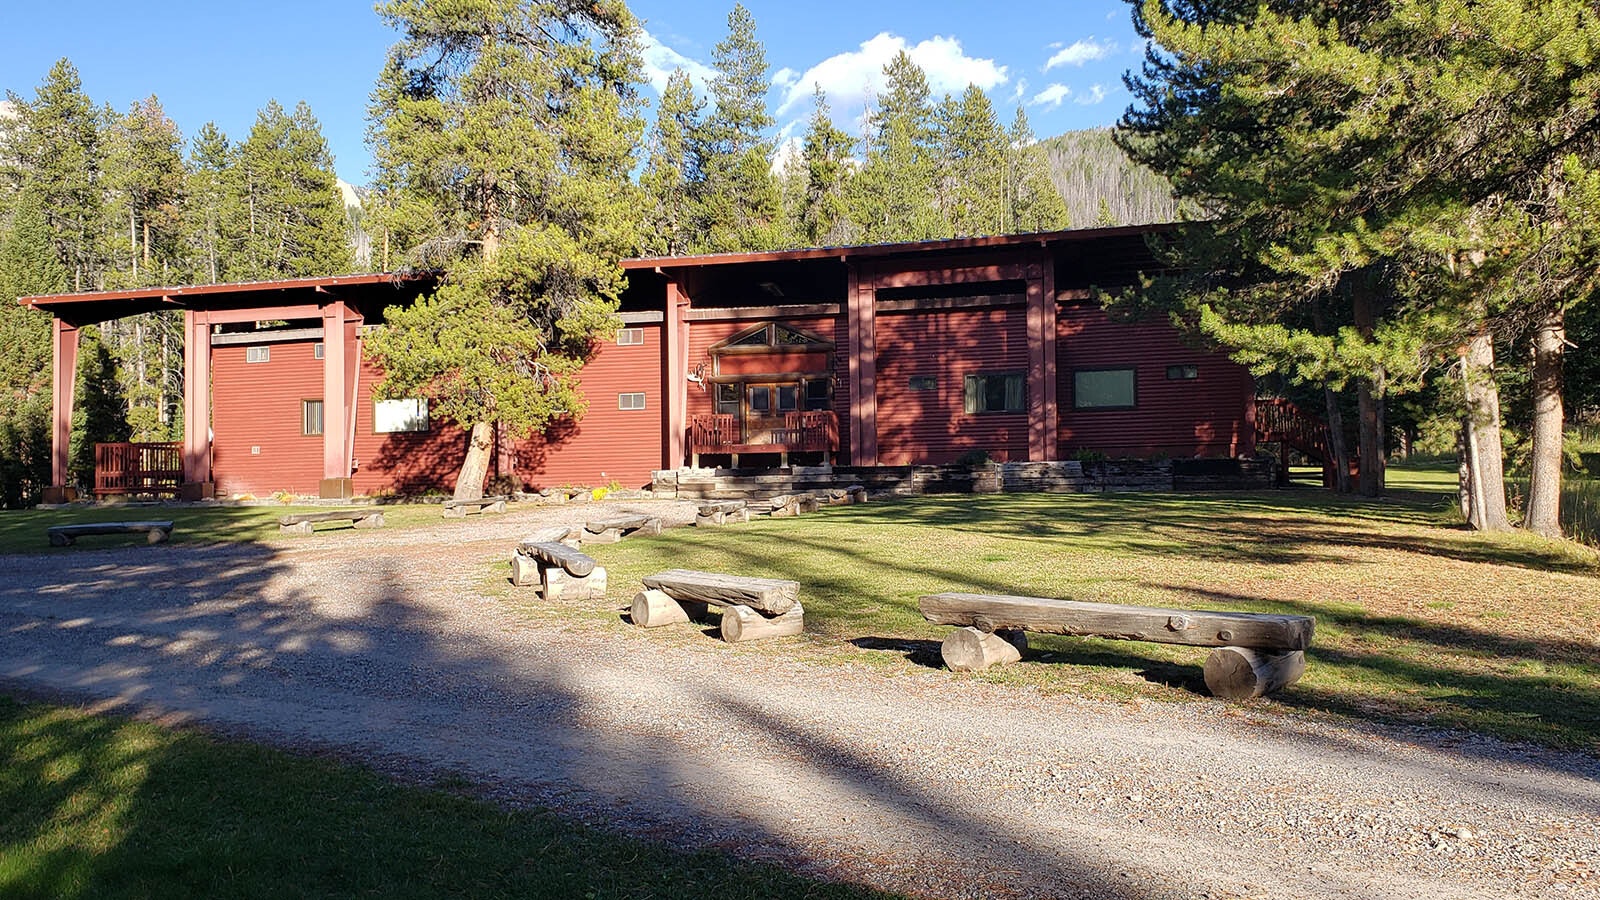 Another view of the lodge at Granite Creek Ranch.